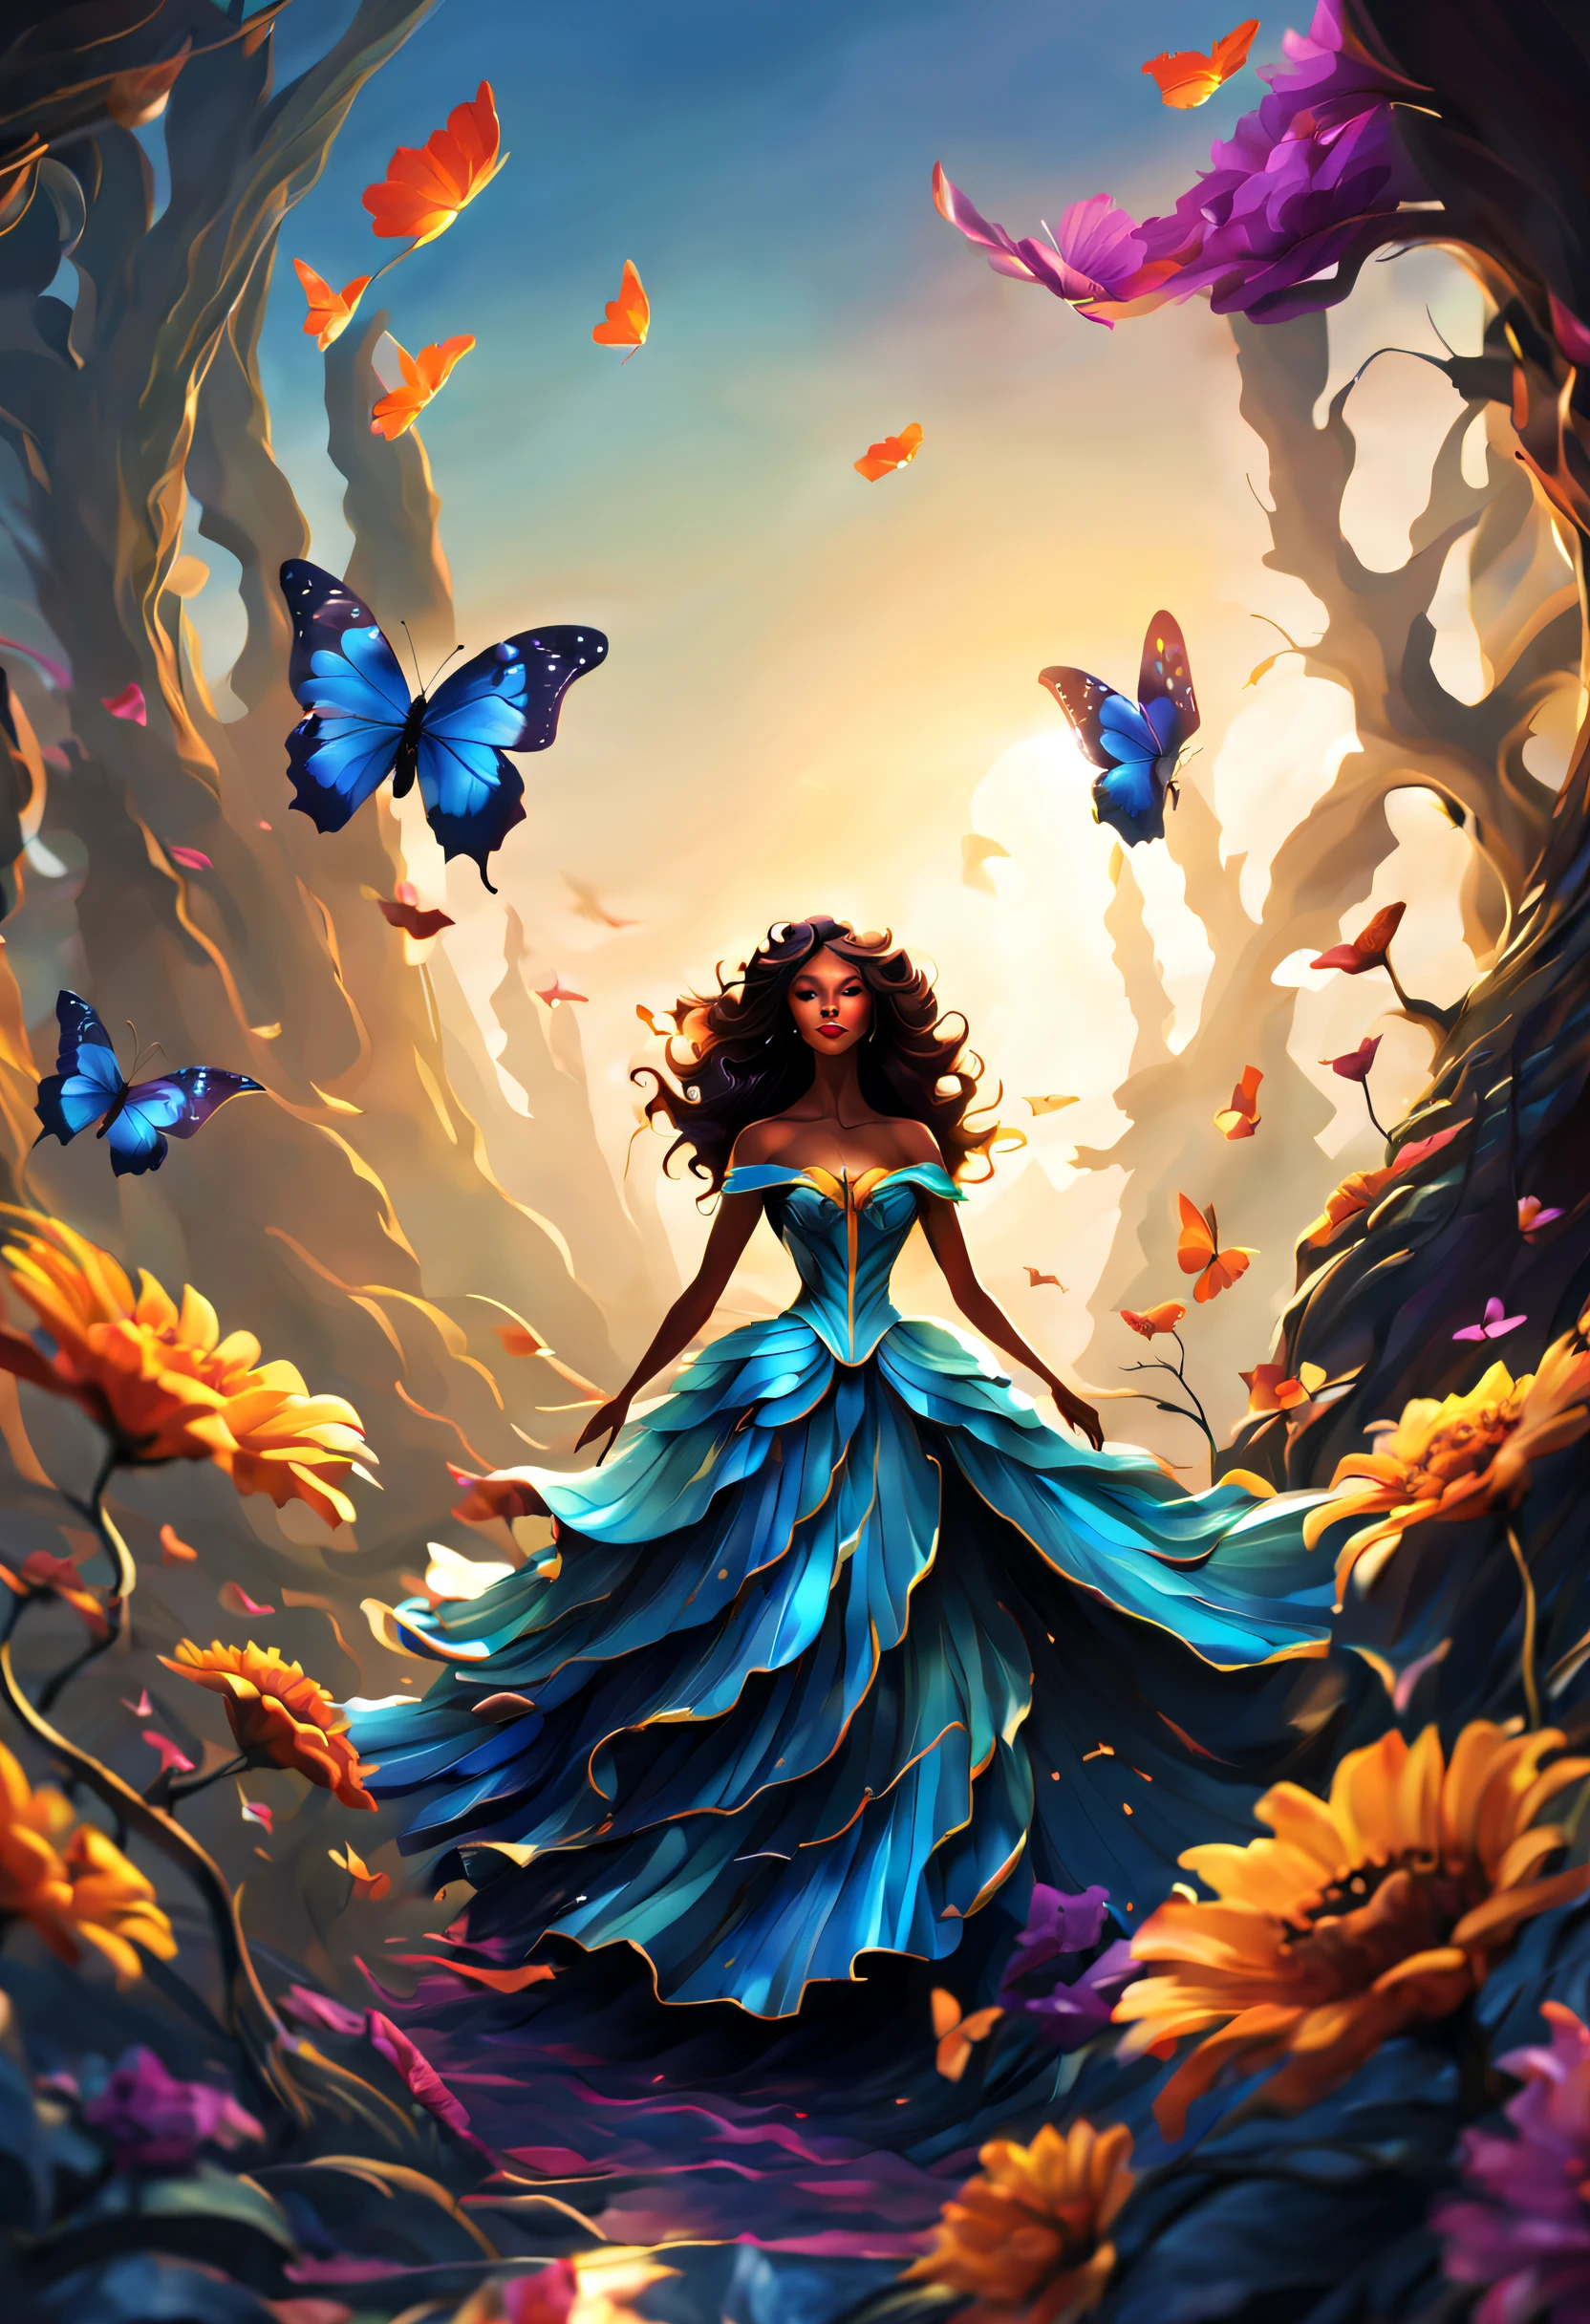 (best quality, 4k, 8k, high resolution, masterpiece: 1.2), (beautiful butterfly queen:1.32) and ultra detailed, long wings, vibrant and colorful, butterflies, majestic patterns, royal, regal, elegant and detailed, delicate, ethereal, iridescent. , shimmering, graceful, enchanting, fluttering, floating, luminous, mythical, fantasy, magical, enchantment, surreal, lush, blooming, vibrant garden, sun kissed, sunlit, soft, dreamy, golden rays of light, flowers bright, radiant and brilliant, harmonious, peaceful, calm, serene, fascinating, captivating.